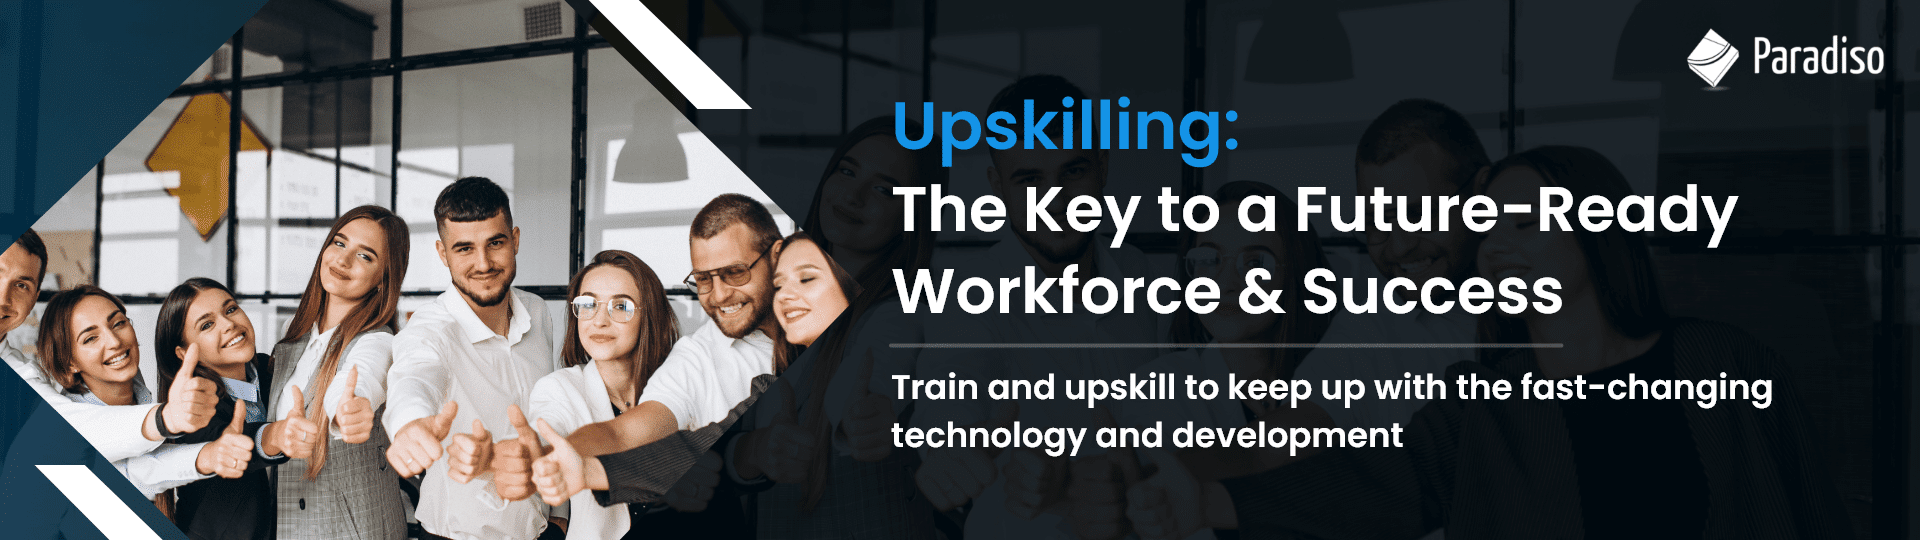 Why Upskilling is key to success